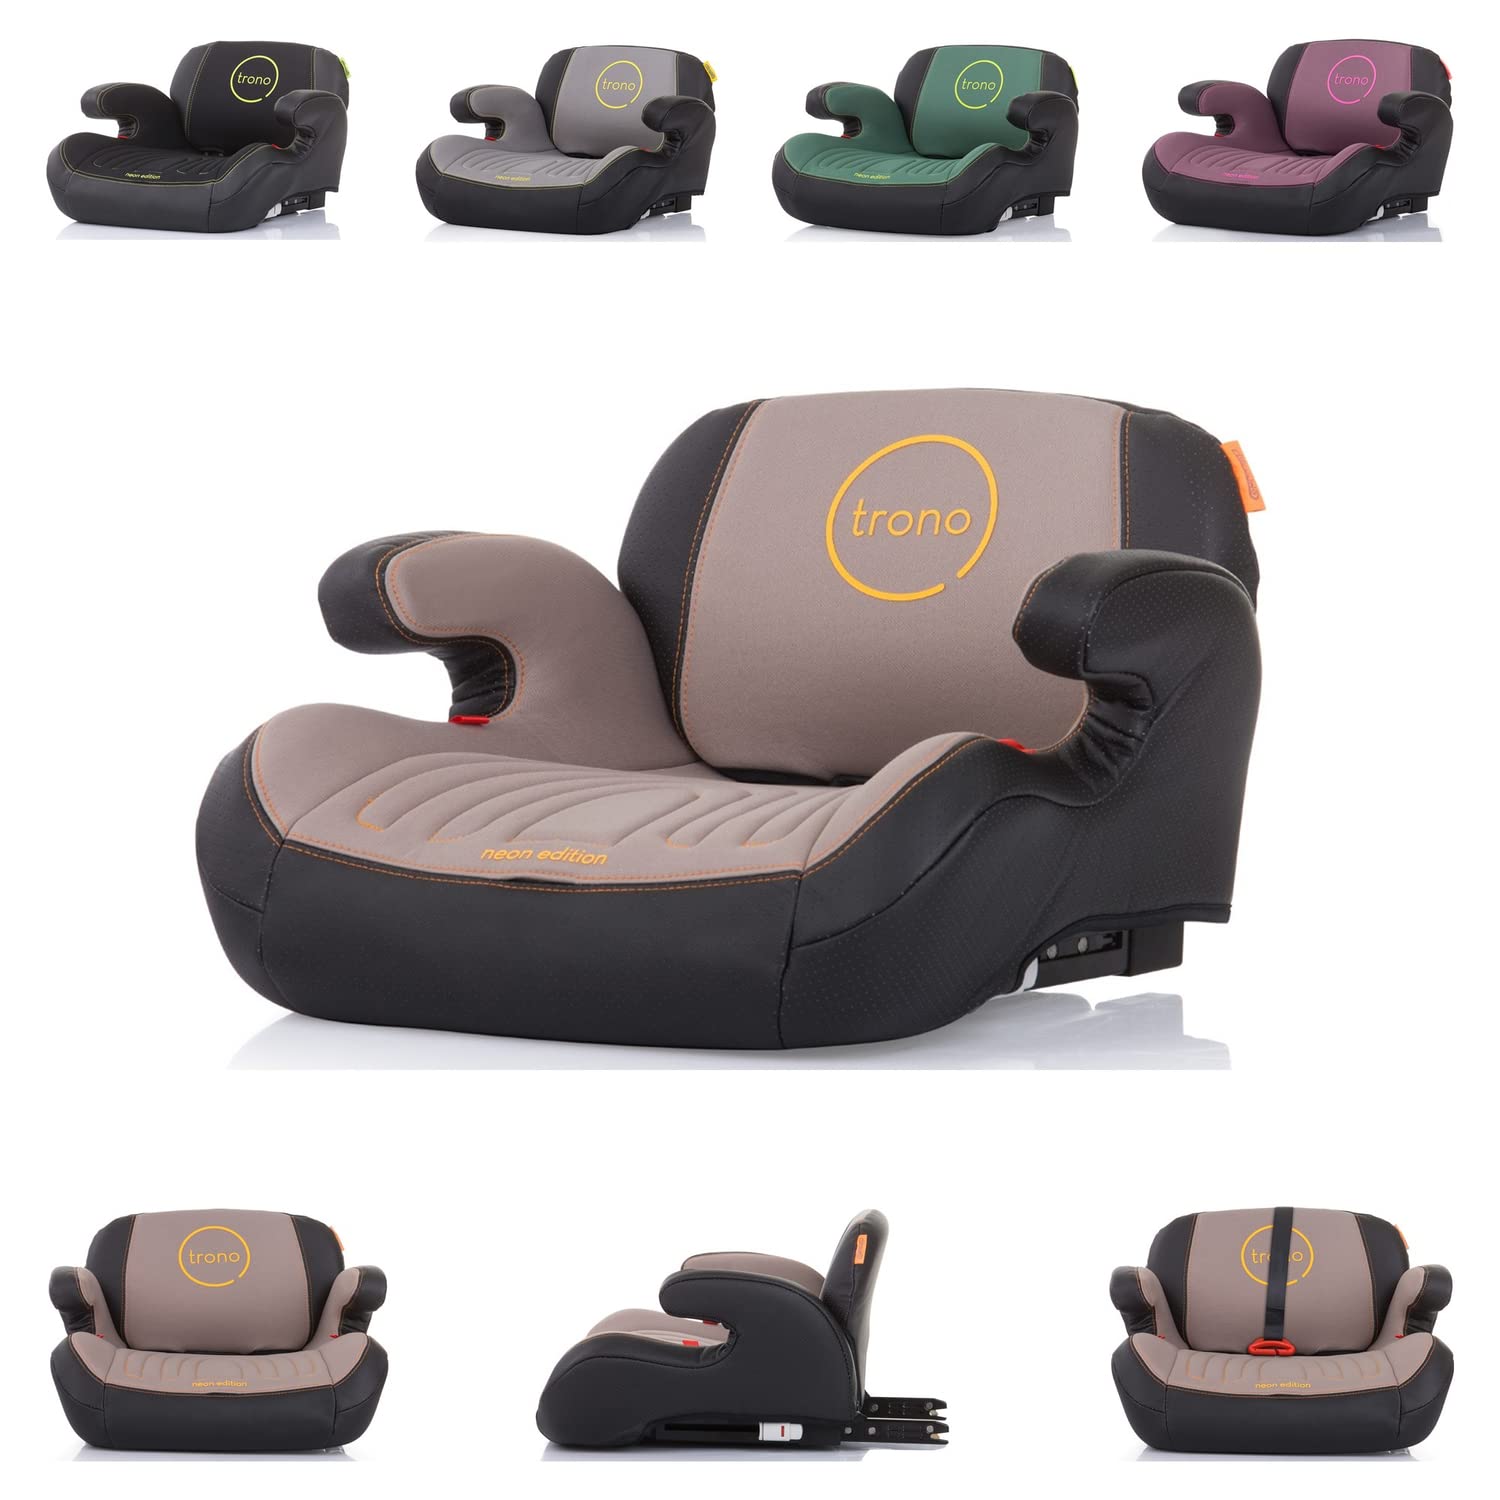 Chipolino Trono Isofix Child Booster Seat Group 3 (22-36 kg) Brown